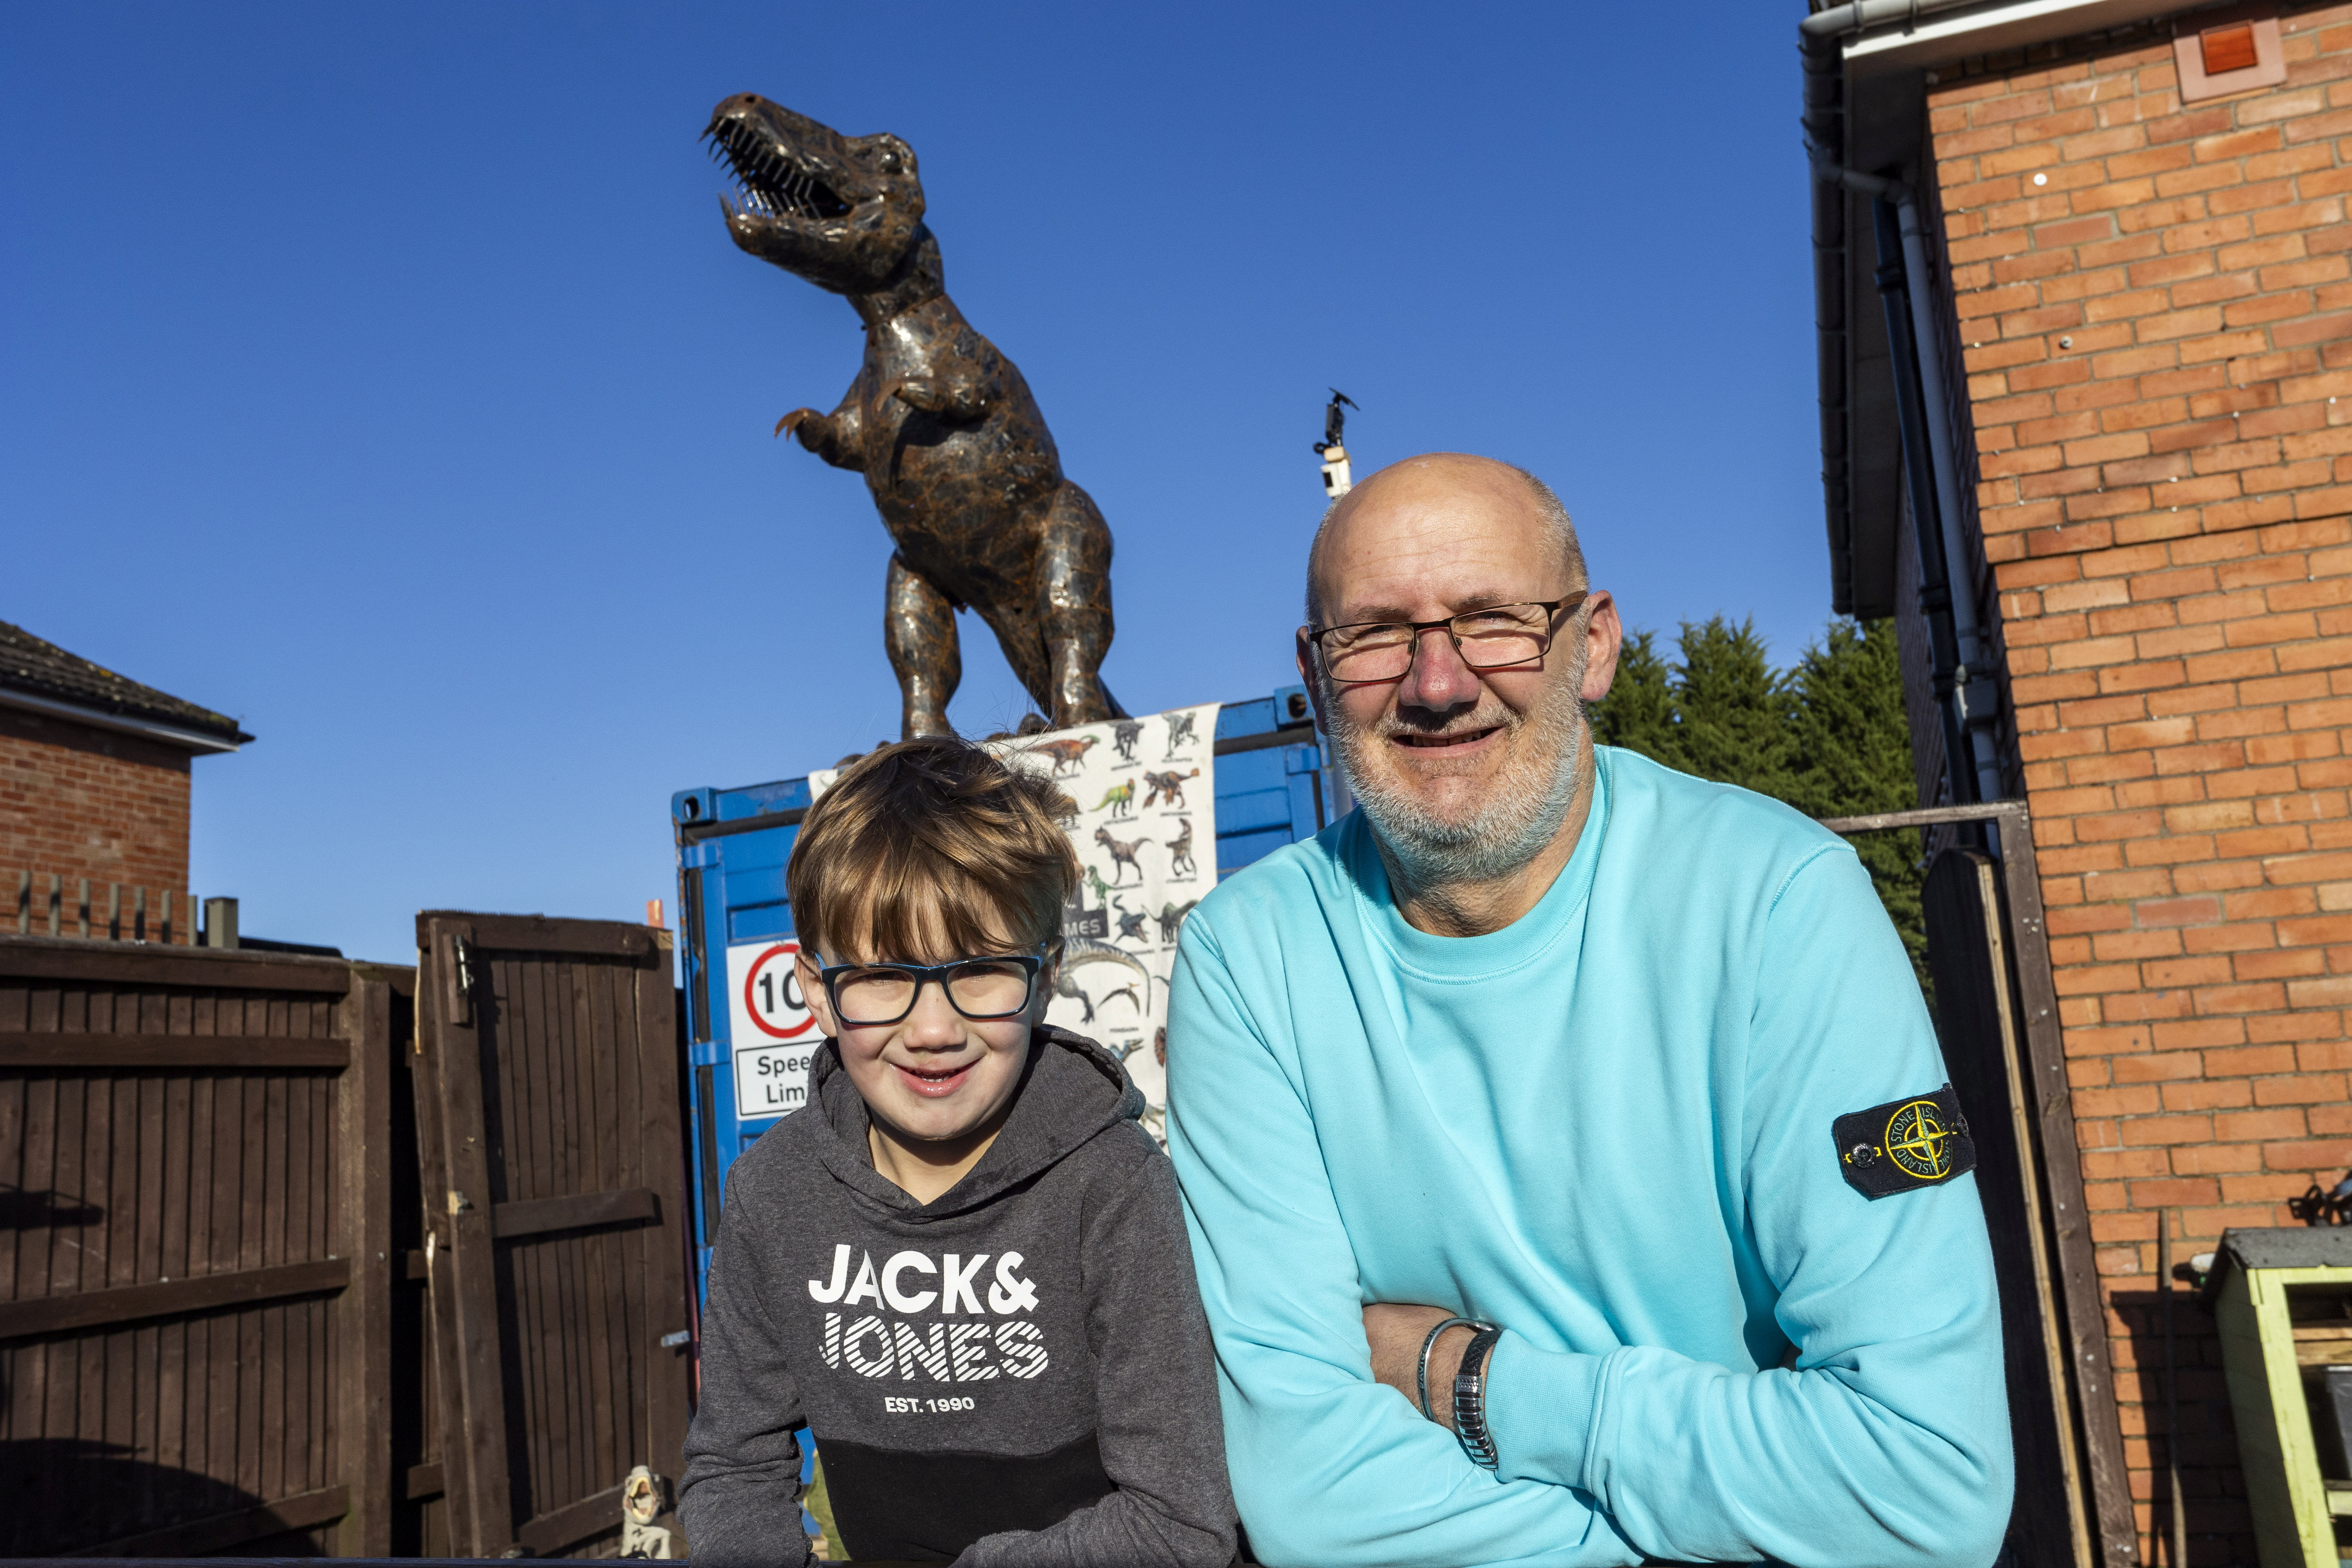 Ben Maddocks put the metalwork up for son Noah who loved dinosaurs